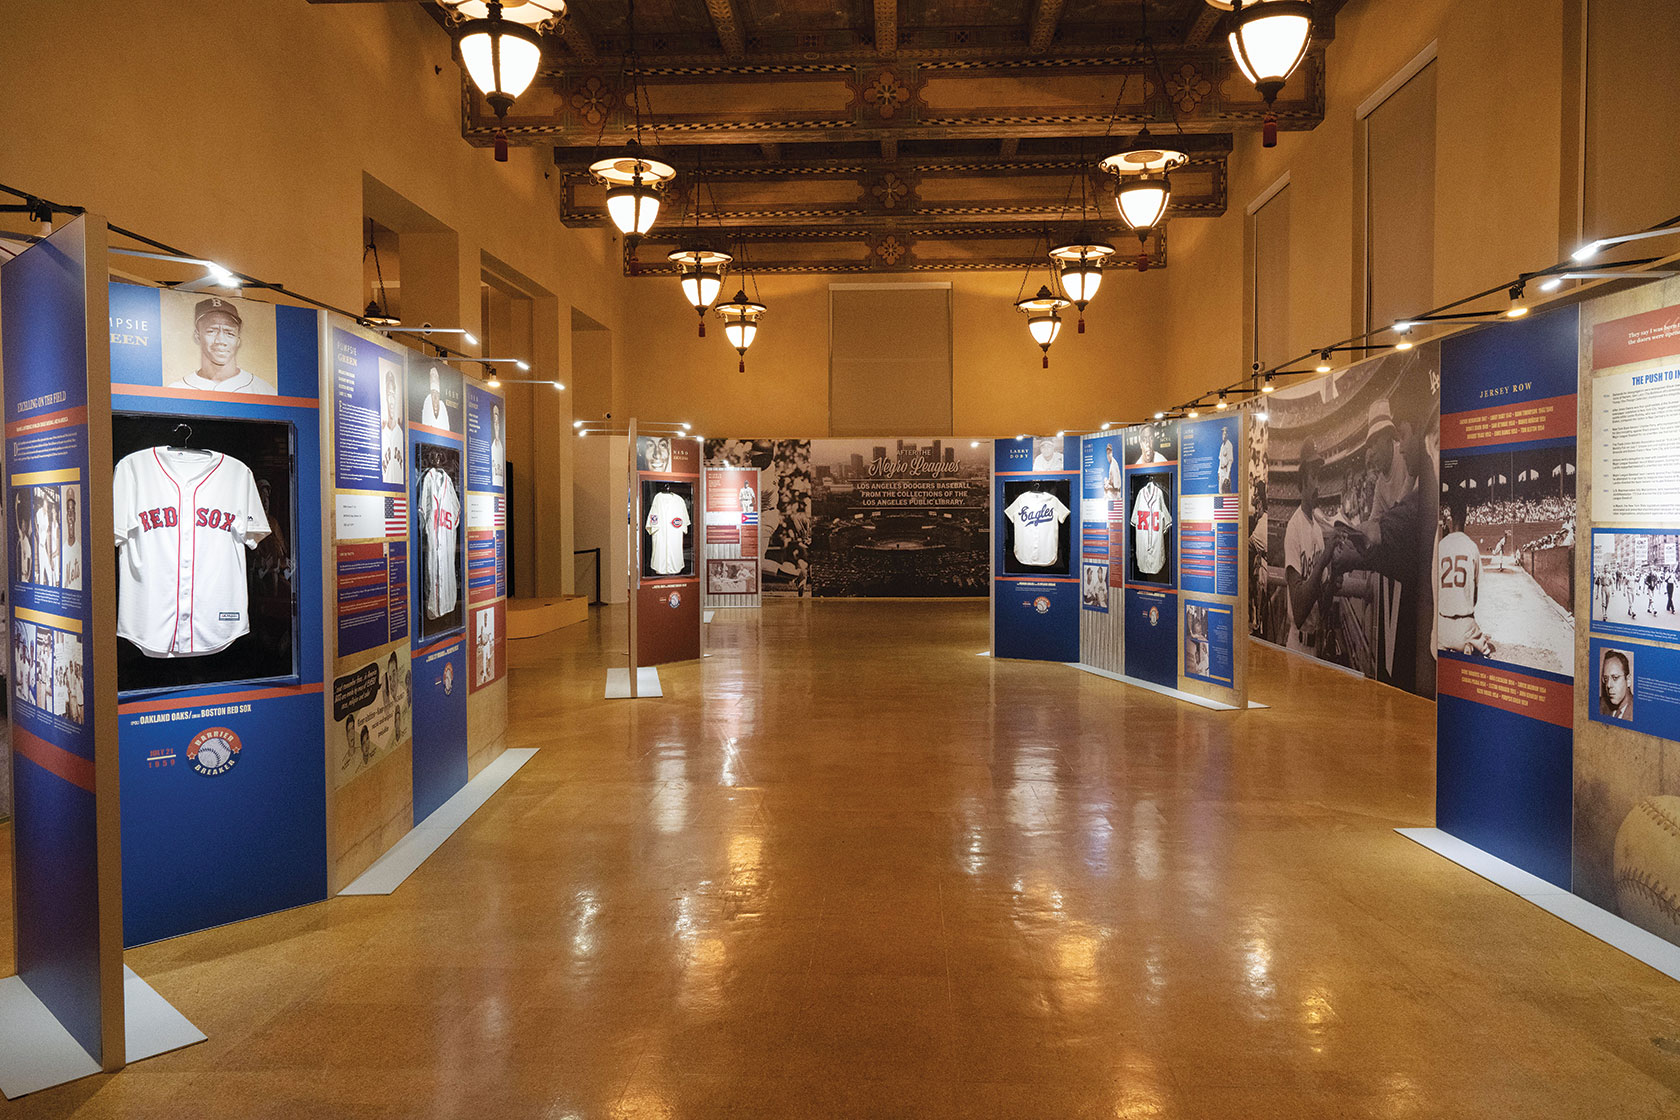 Washington Nationals honored with exhibit at Cooperstown